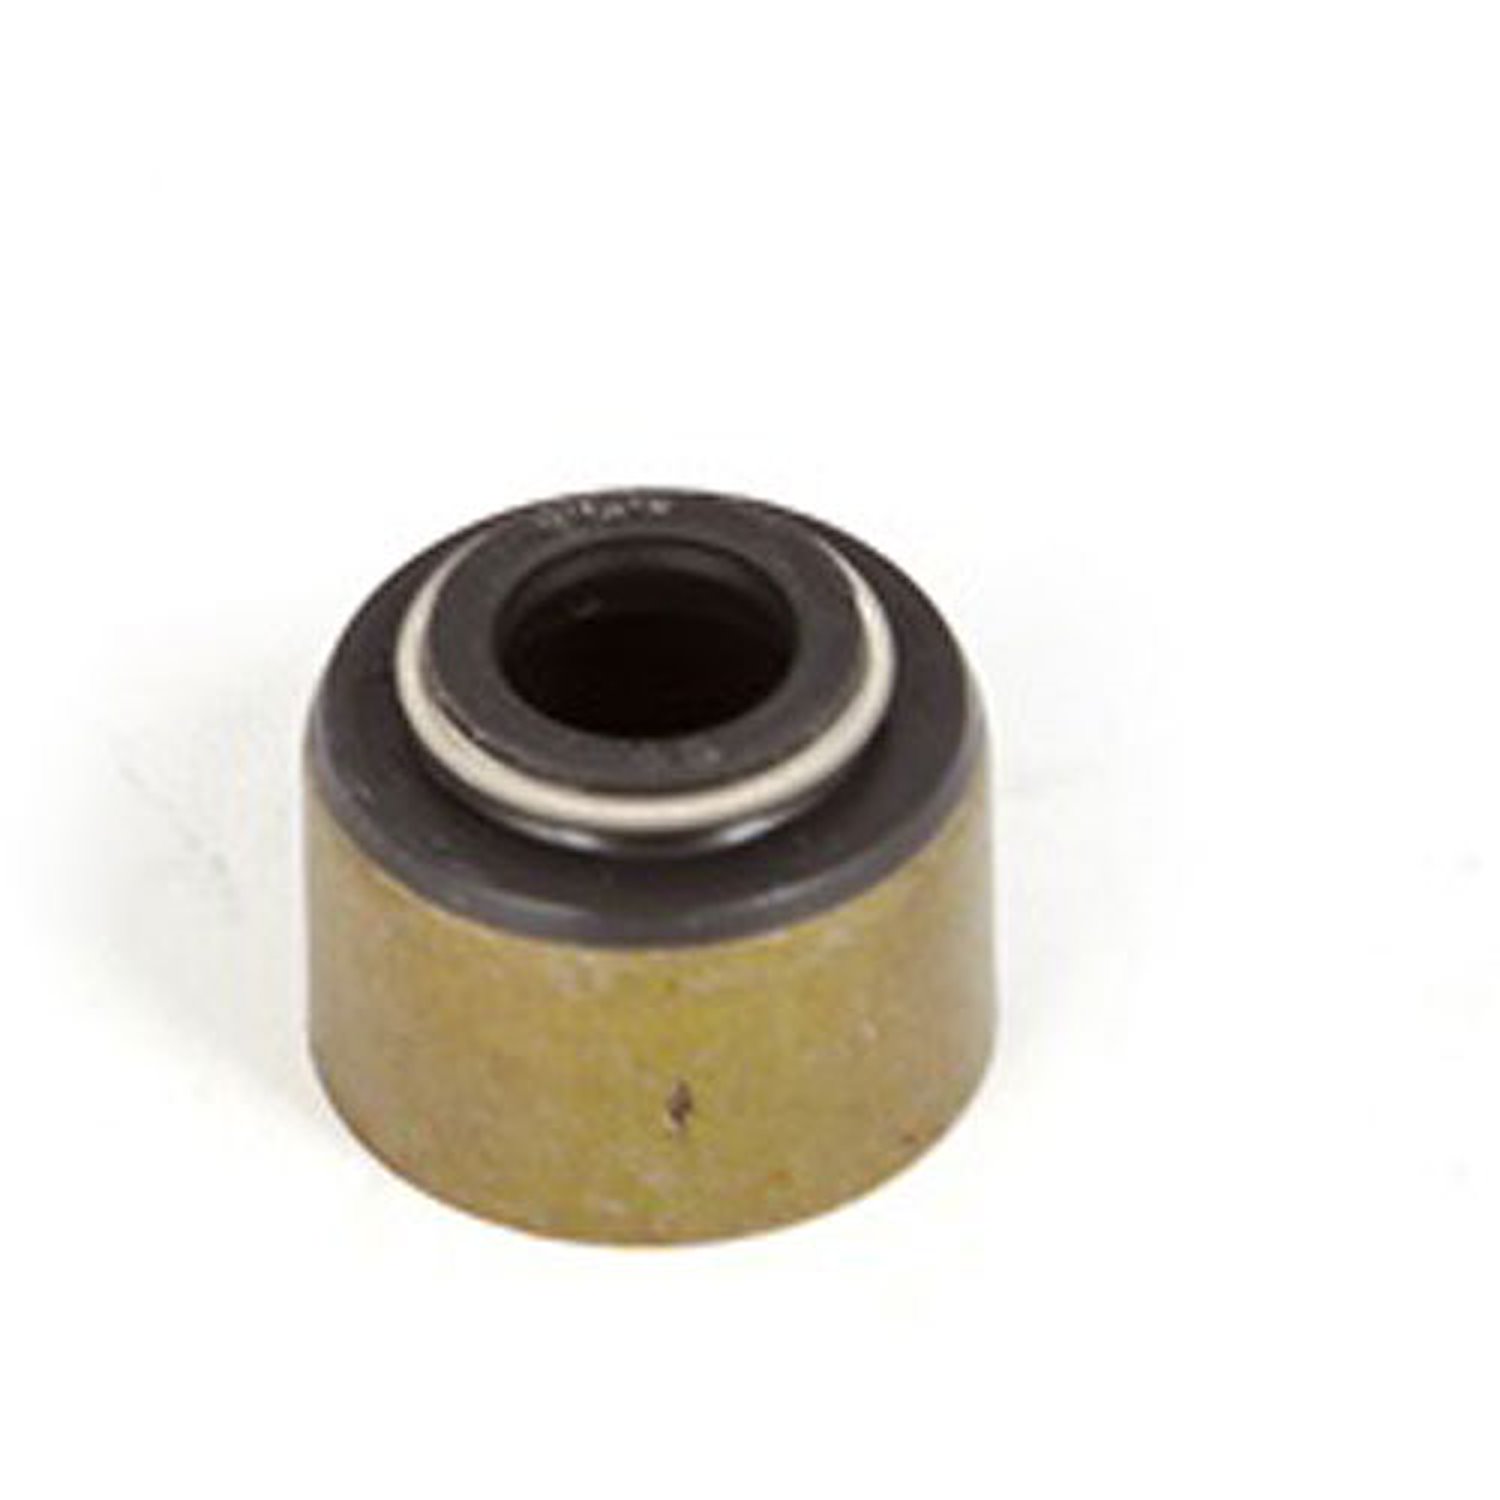 This intake valve guide seal from Omix-ADA fits 2.5L 4.0L 5.2L and 5.9L engines in 84-02 Jeep Cherok